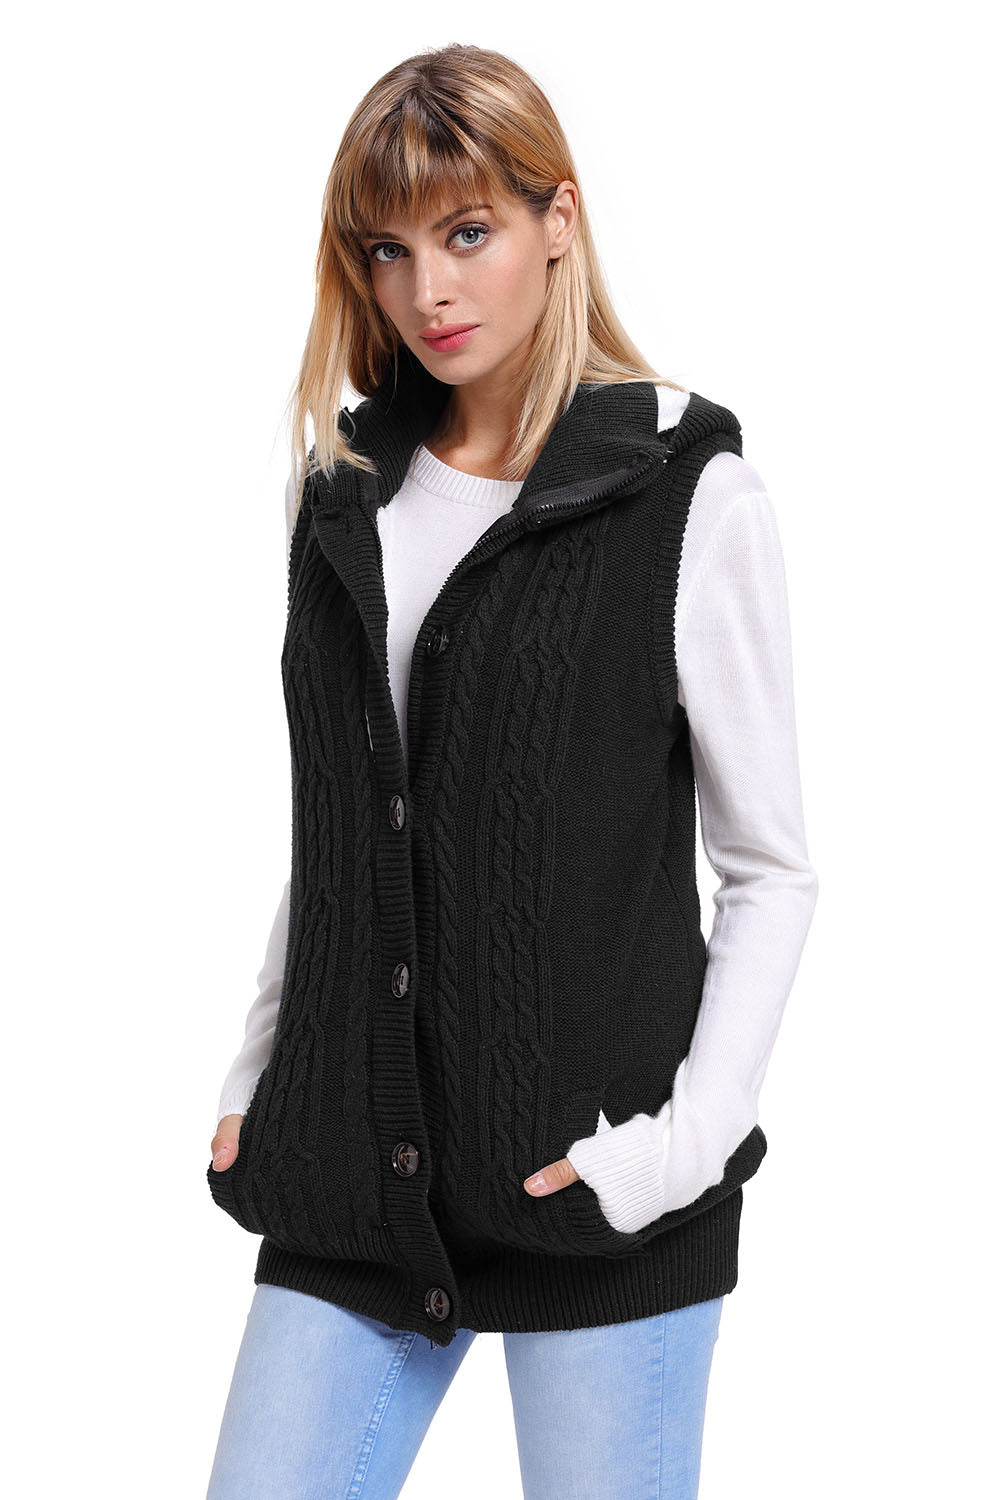 Women Black Cable Knit Hooded Sweater Vest